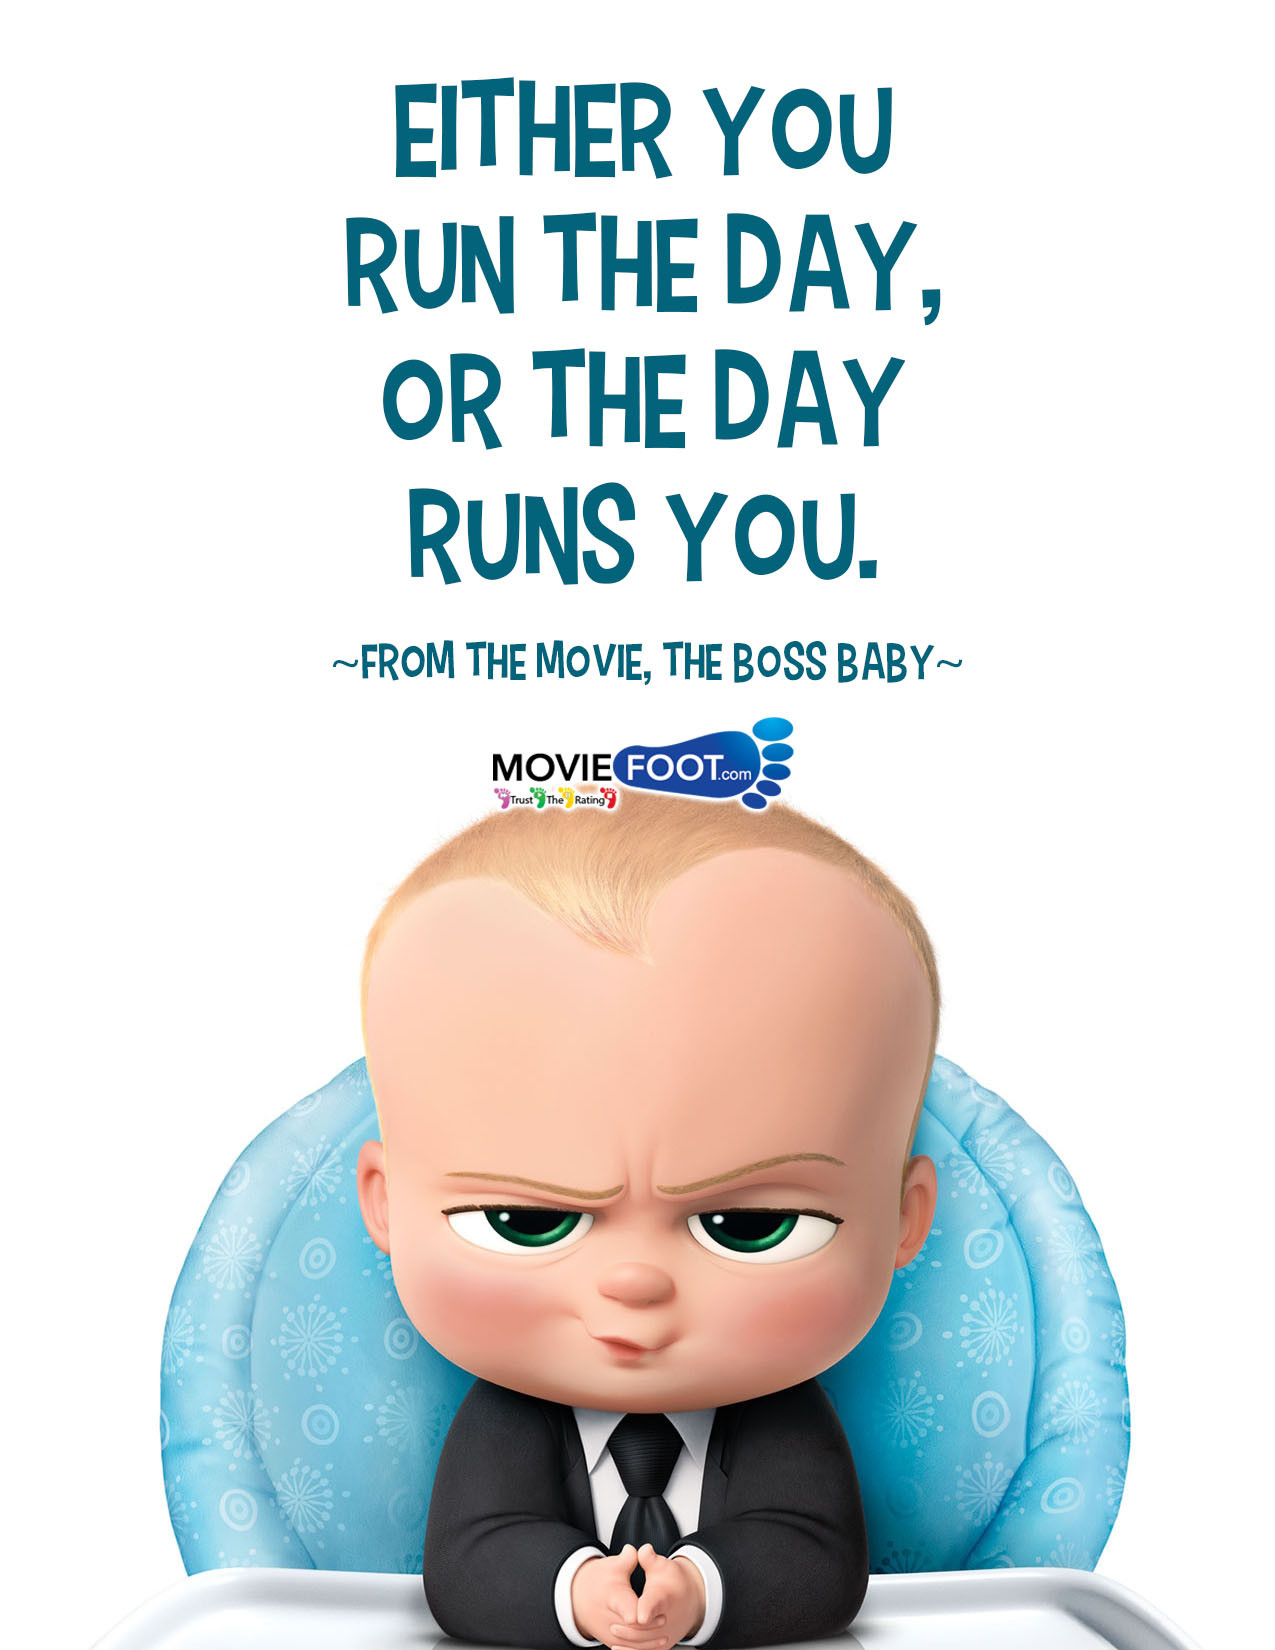 Baby Baby Baby Movie Quote
 The Boss Baby Movie Review